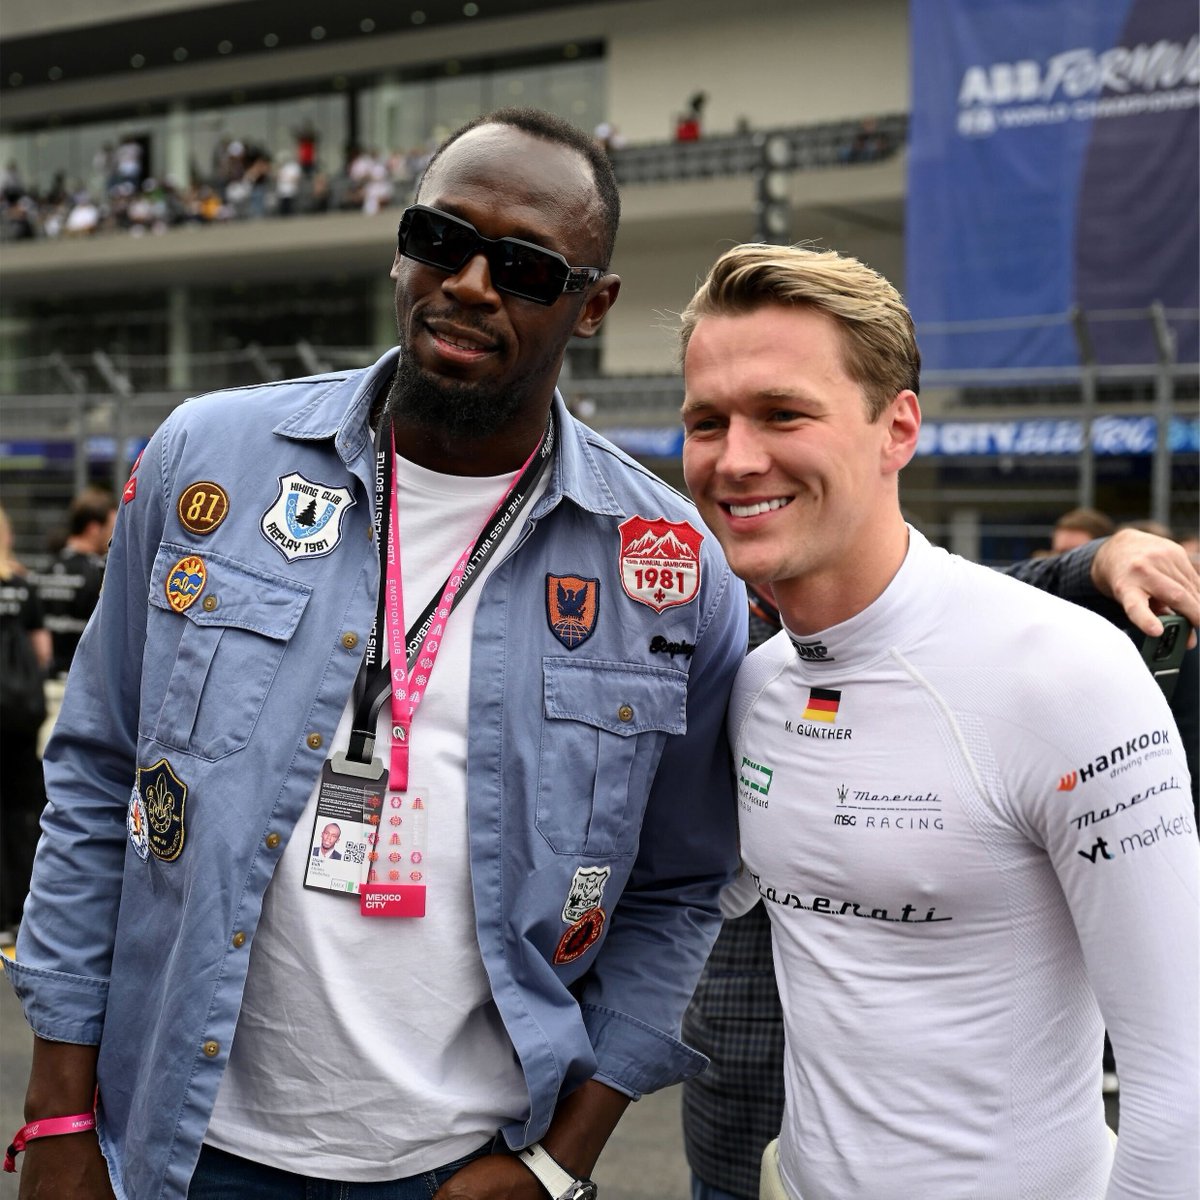 A meeting of speed titans! ⚡️

@usainbolt and our drivers shared a moment at the @Hankook_Sport #MexicoCityEPrix 🏁